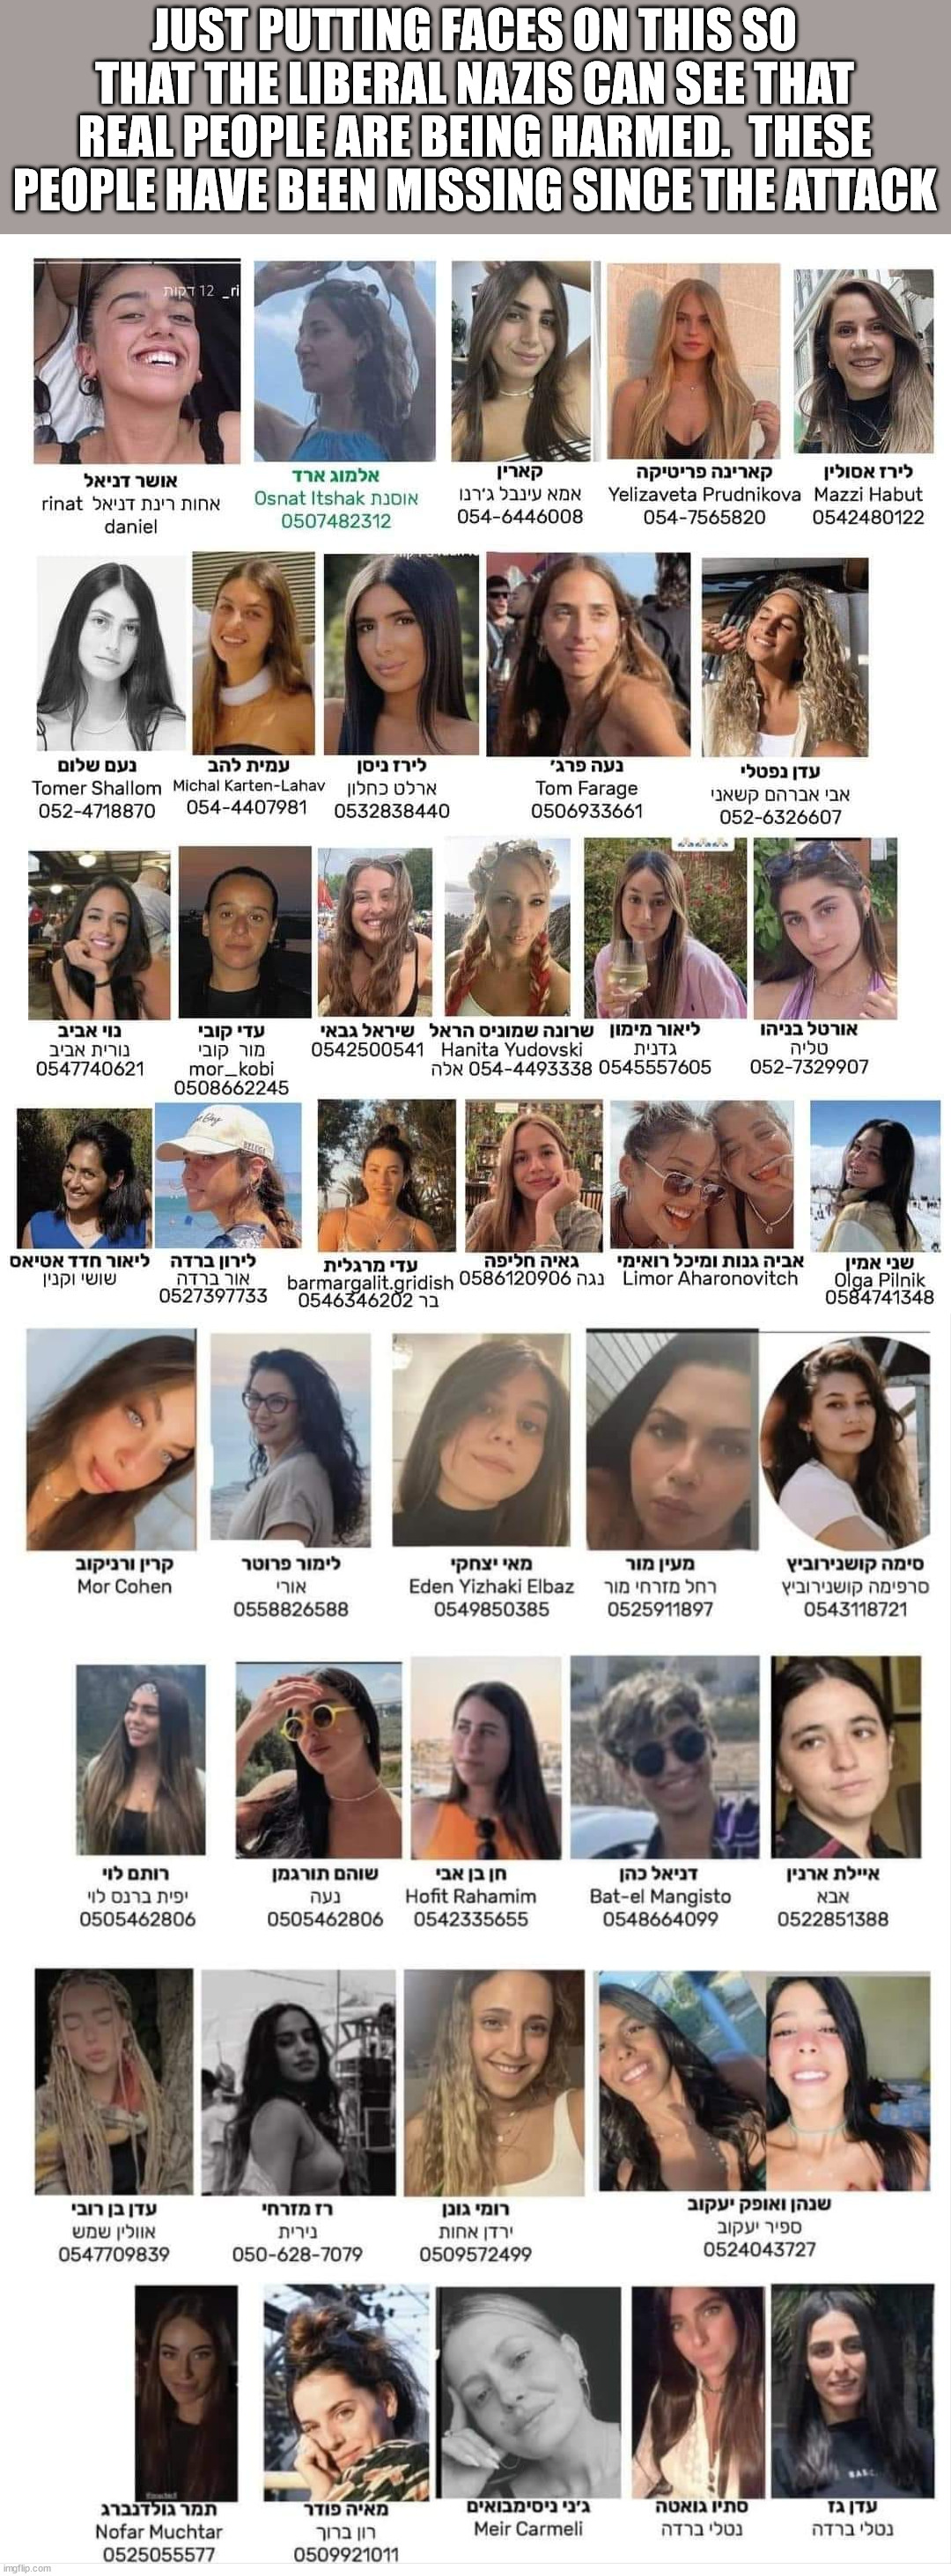 JUST PUTTING FACES ON THIS SO THAT THE LIBERAL NAZIS CAN SEE THAT REAL PEOPLE ARE BEING HARMED.  THESE PEOPLE HAVE BEEN MISSING SINCE THE AT | made w/ Imgflip meme maker